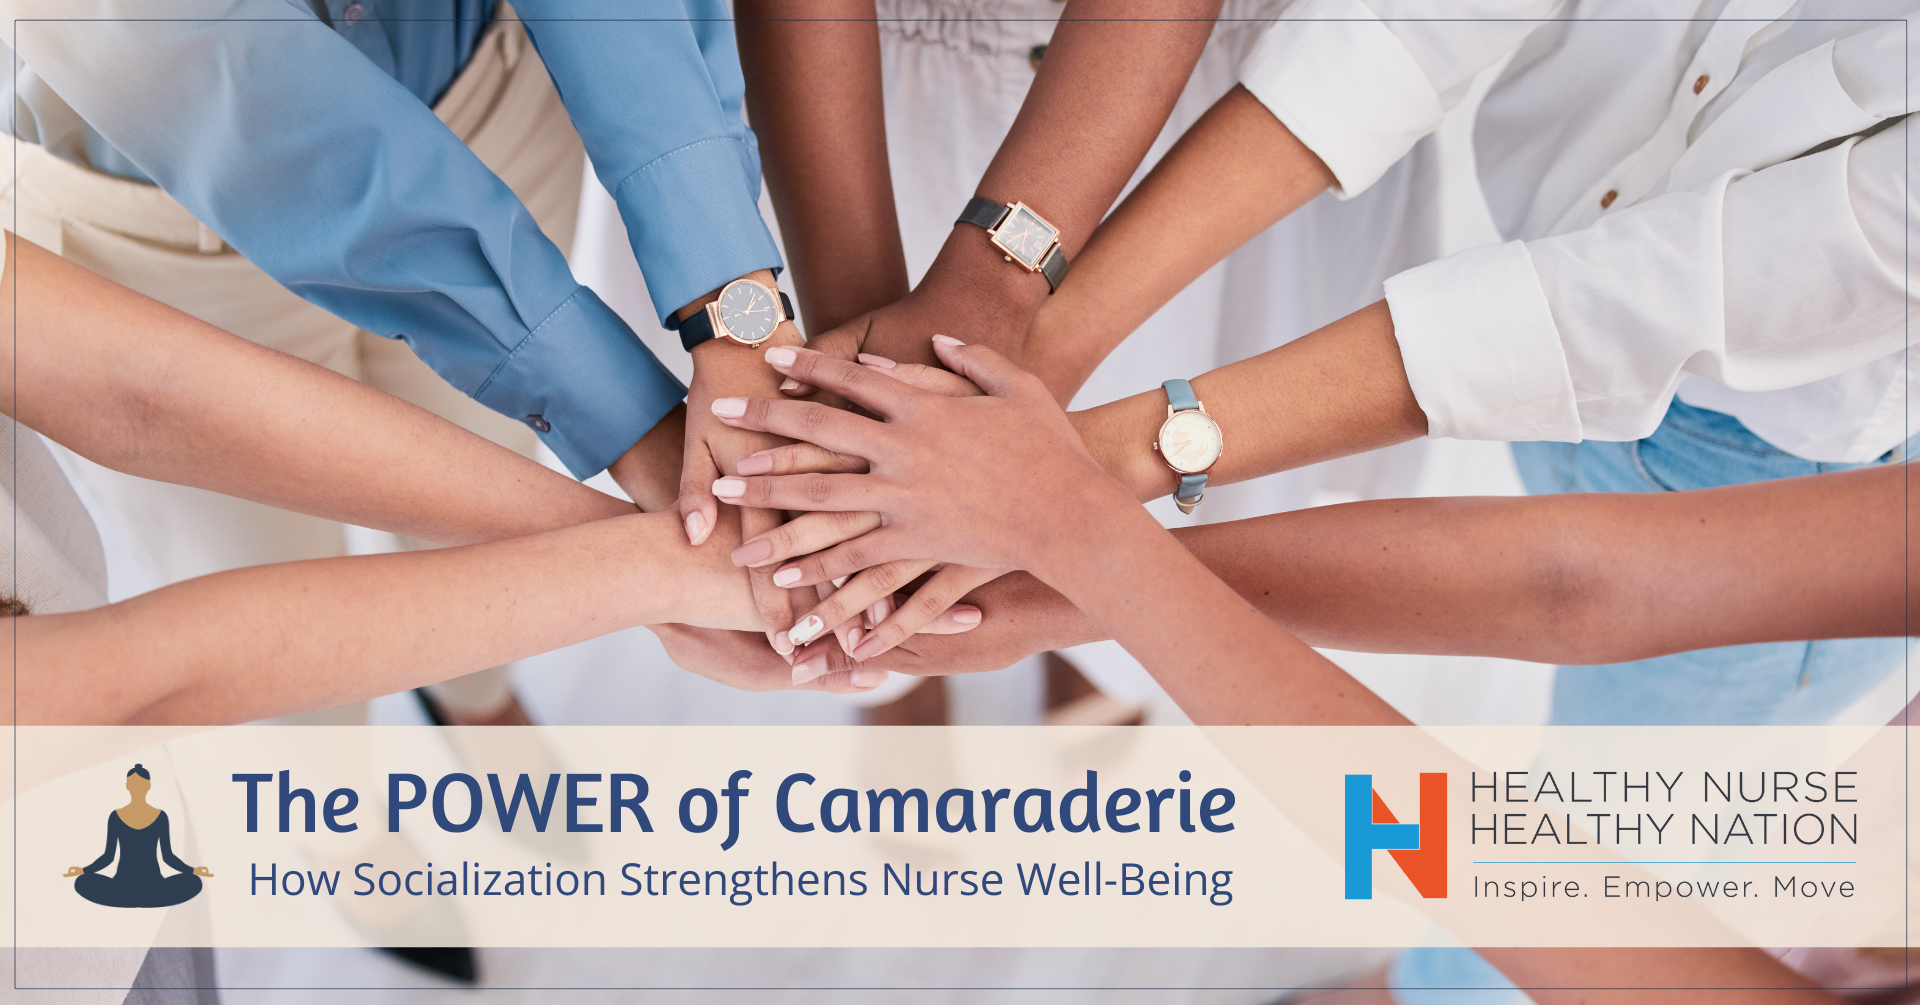 Healthy Nurse, Healthy Nation™ Blog - Did You Know Socialization Strengthens Nurse Well-Being? Learn more about the POWER of Camaraderie 4255